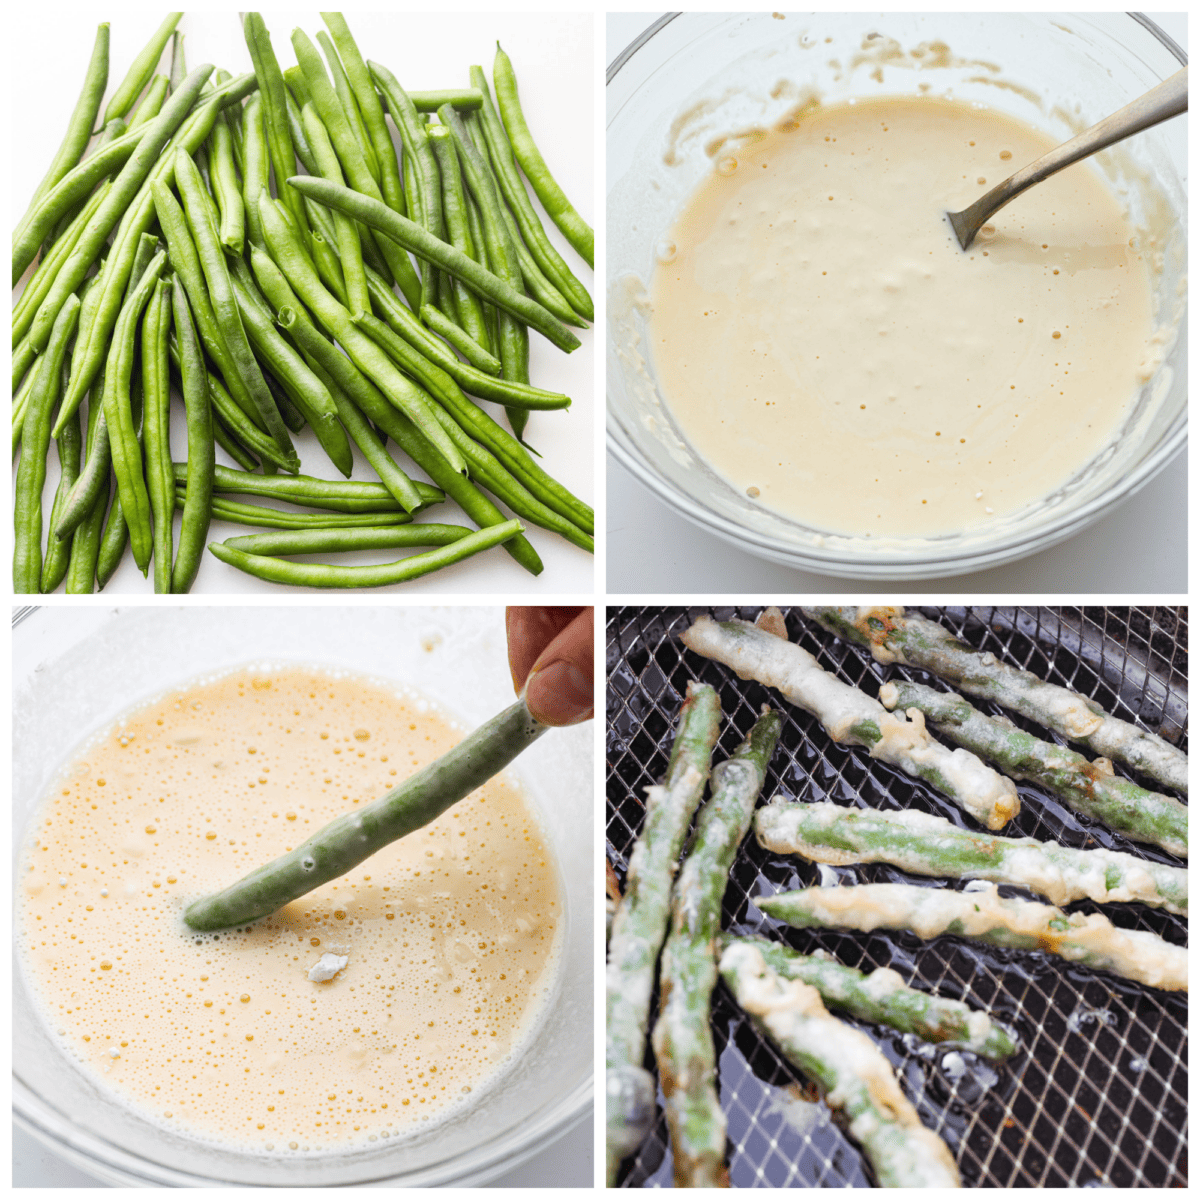 4 pictures showing how to add batter to the green beans and fry them. 